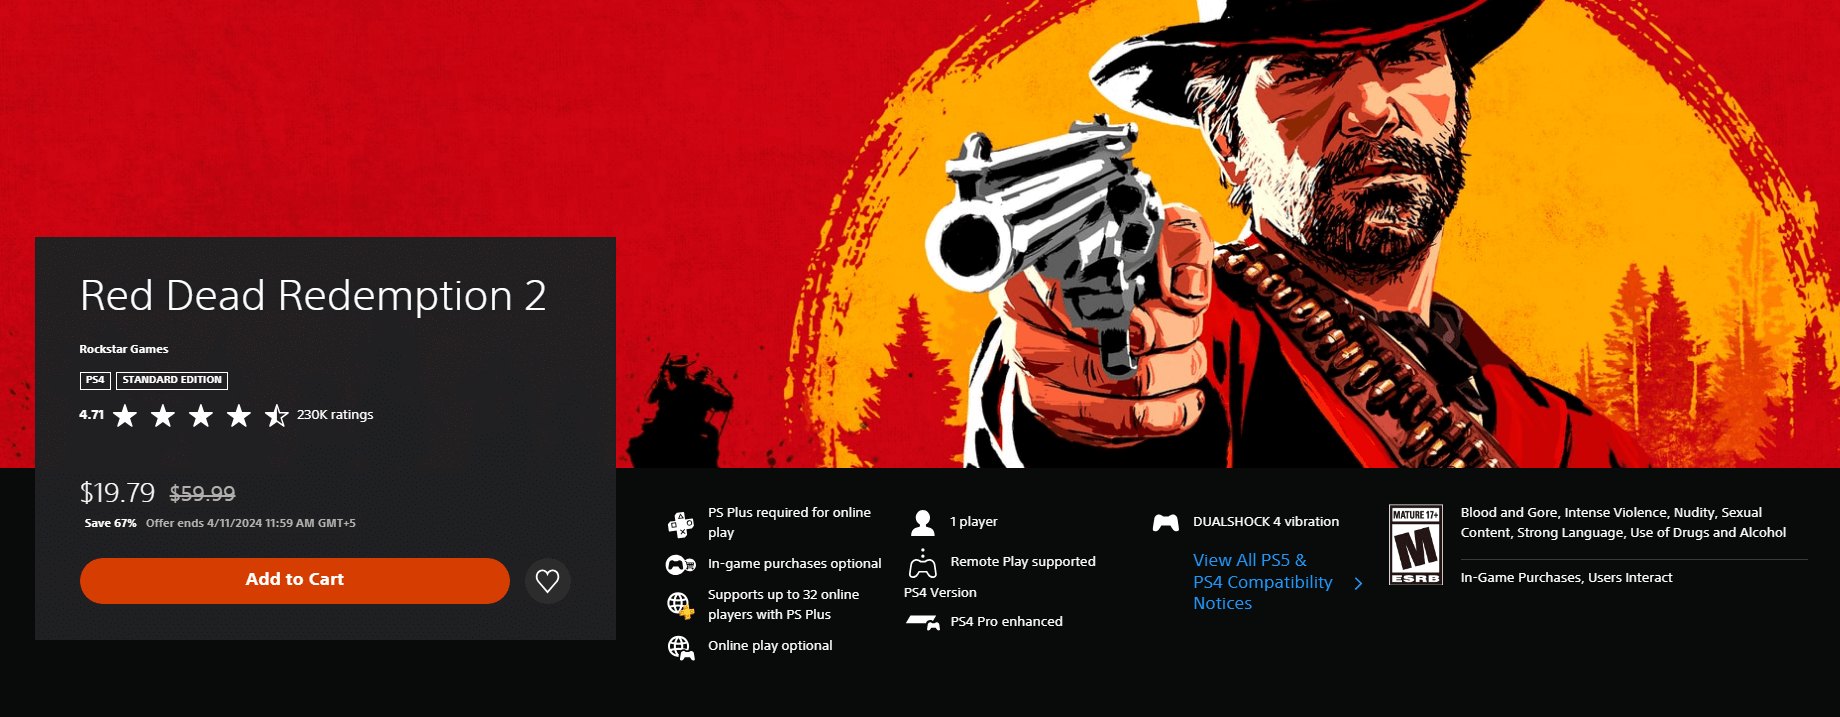 Red Dead Redemption 2 Discounted to 19.79